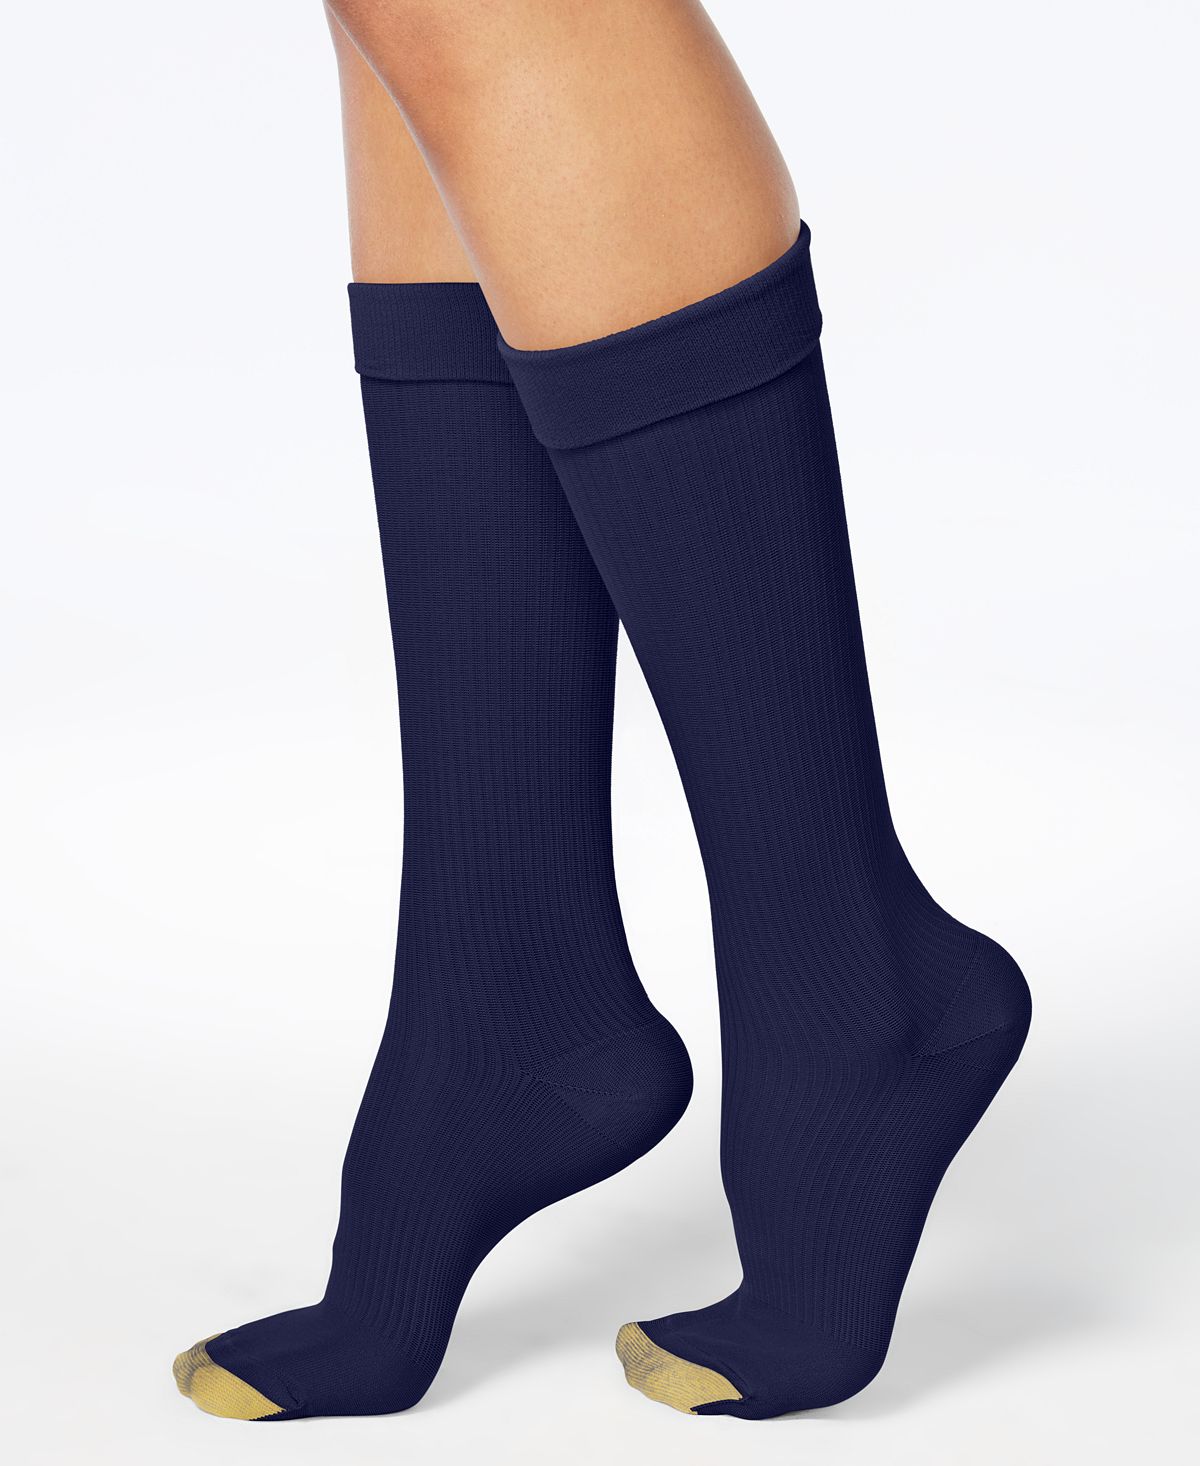 Gold Toe Wellness Wo Compression Moderate Ribbed Calf Socks Navy